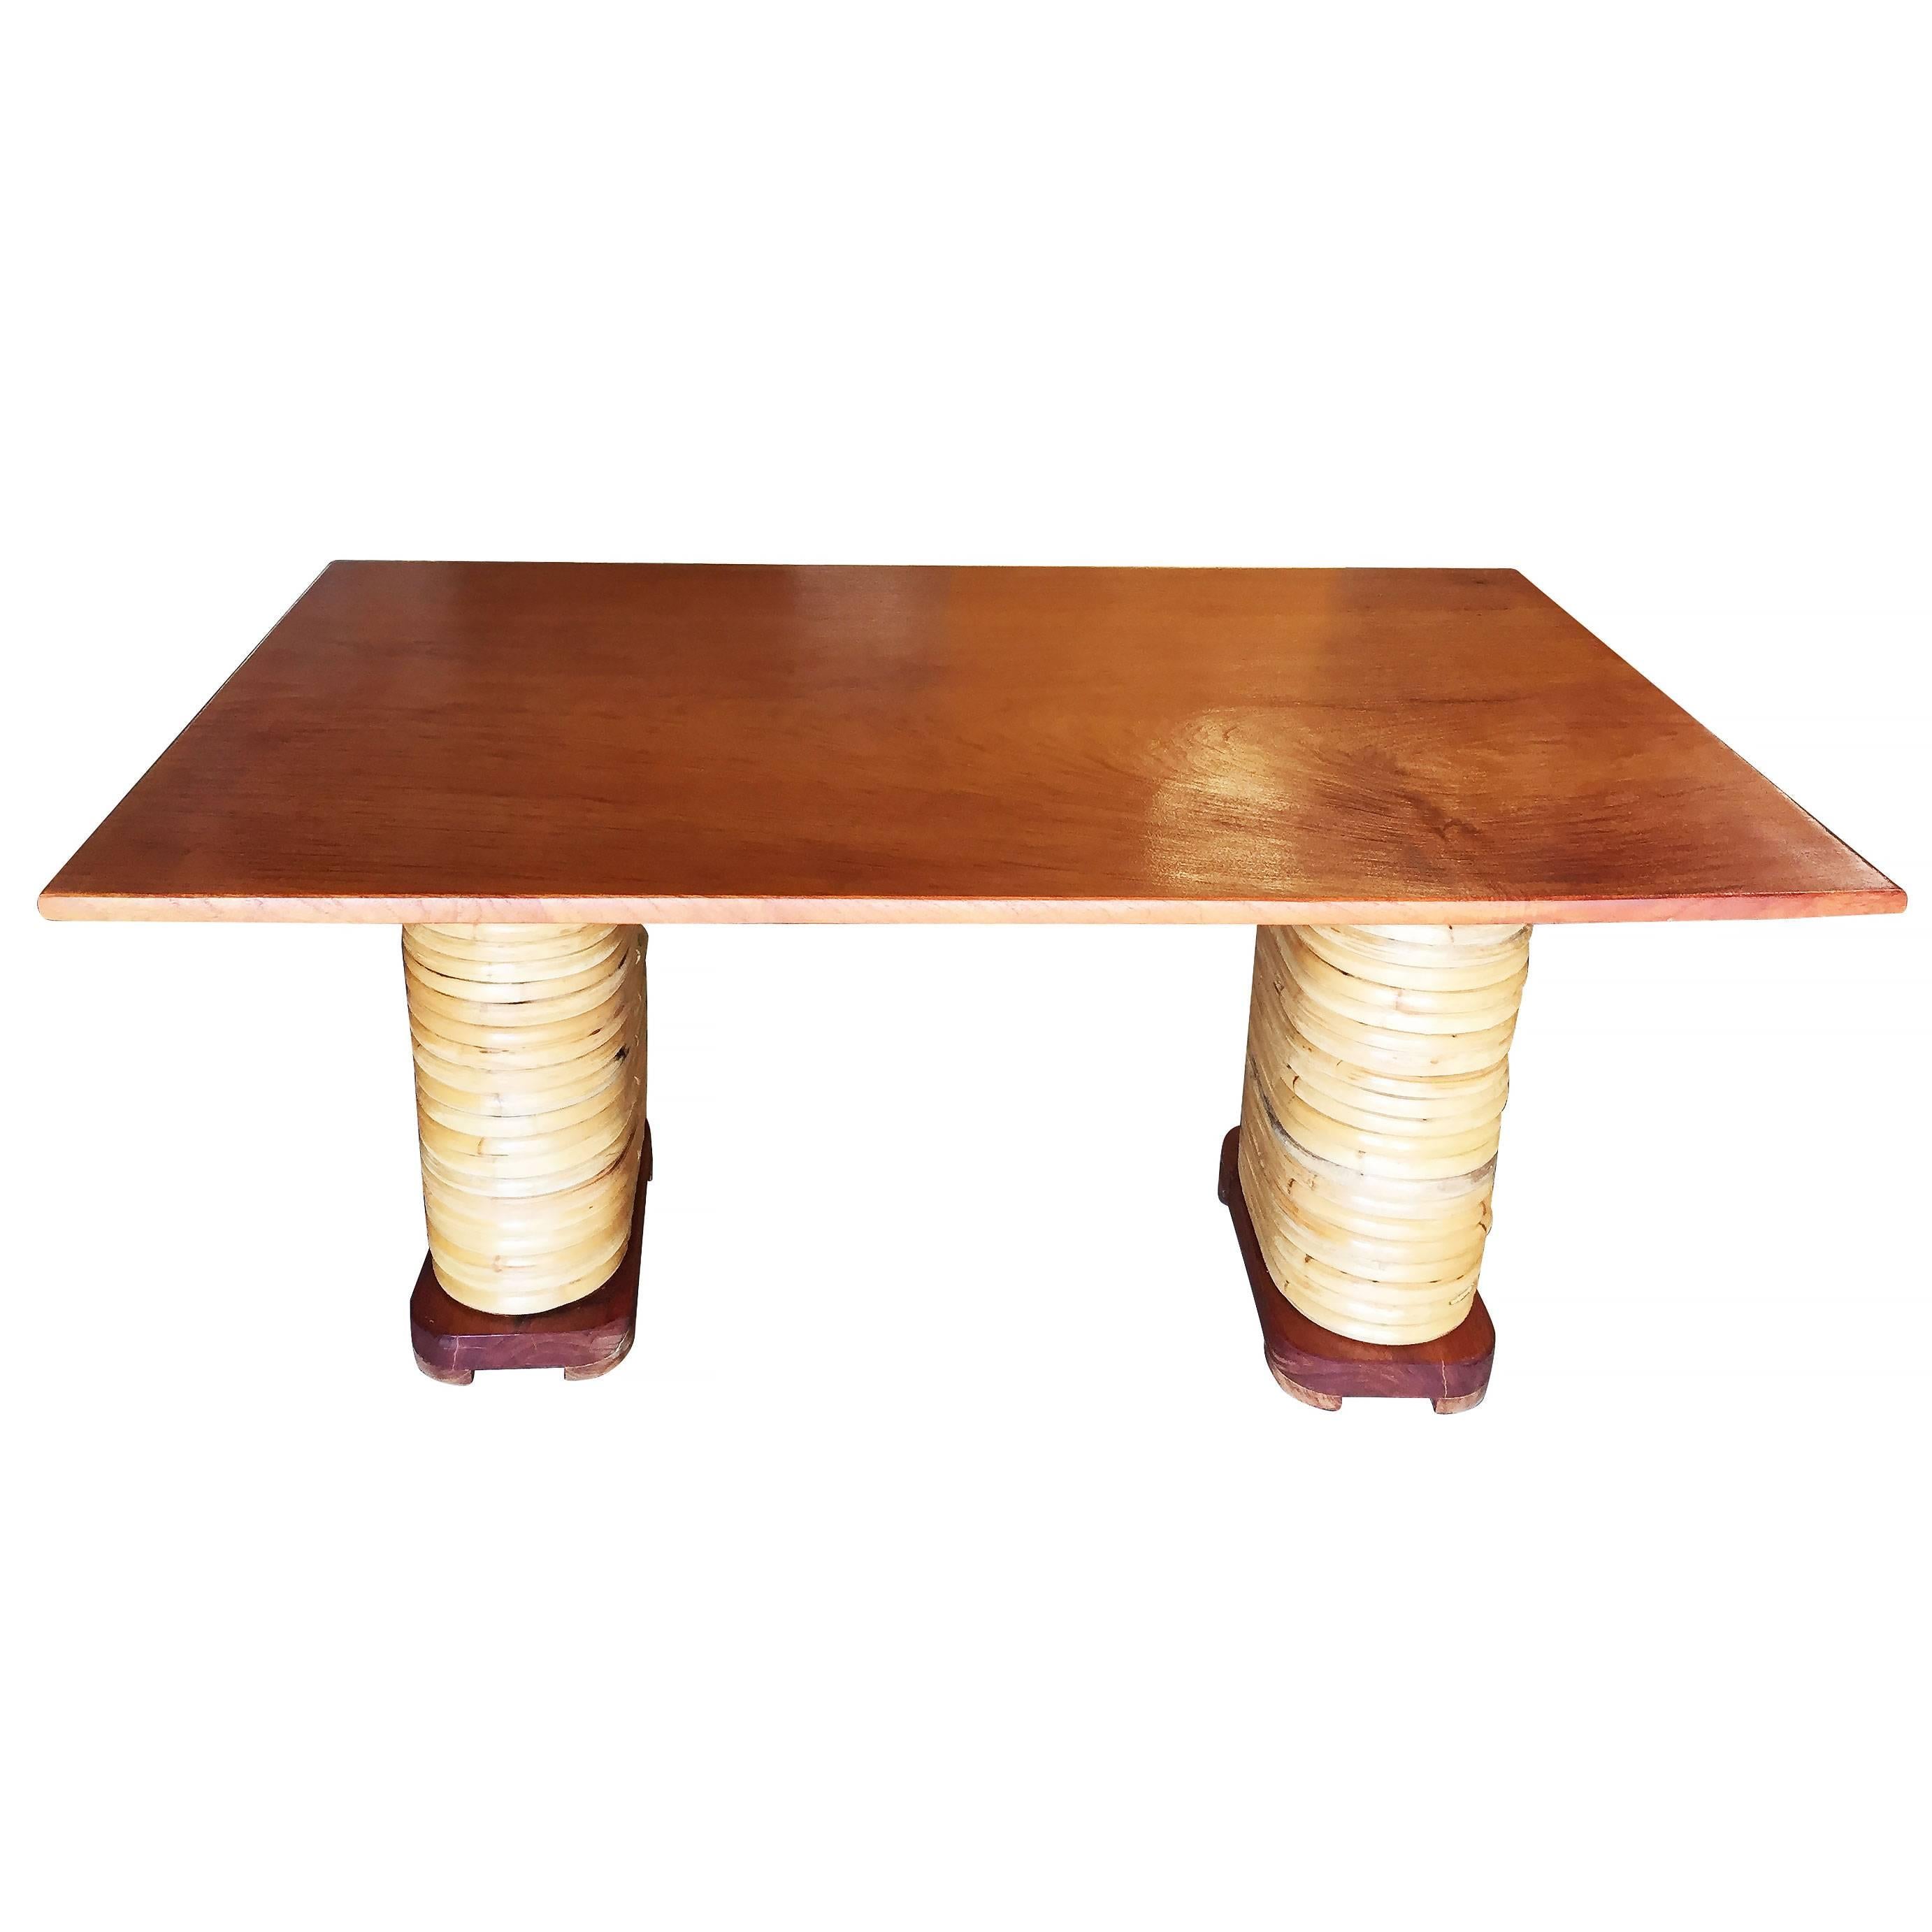 American Restored Midcentury Rattan and Double Mahogany Dining Table with Stacked Base